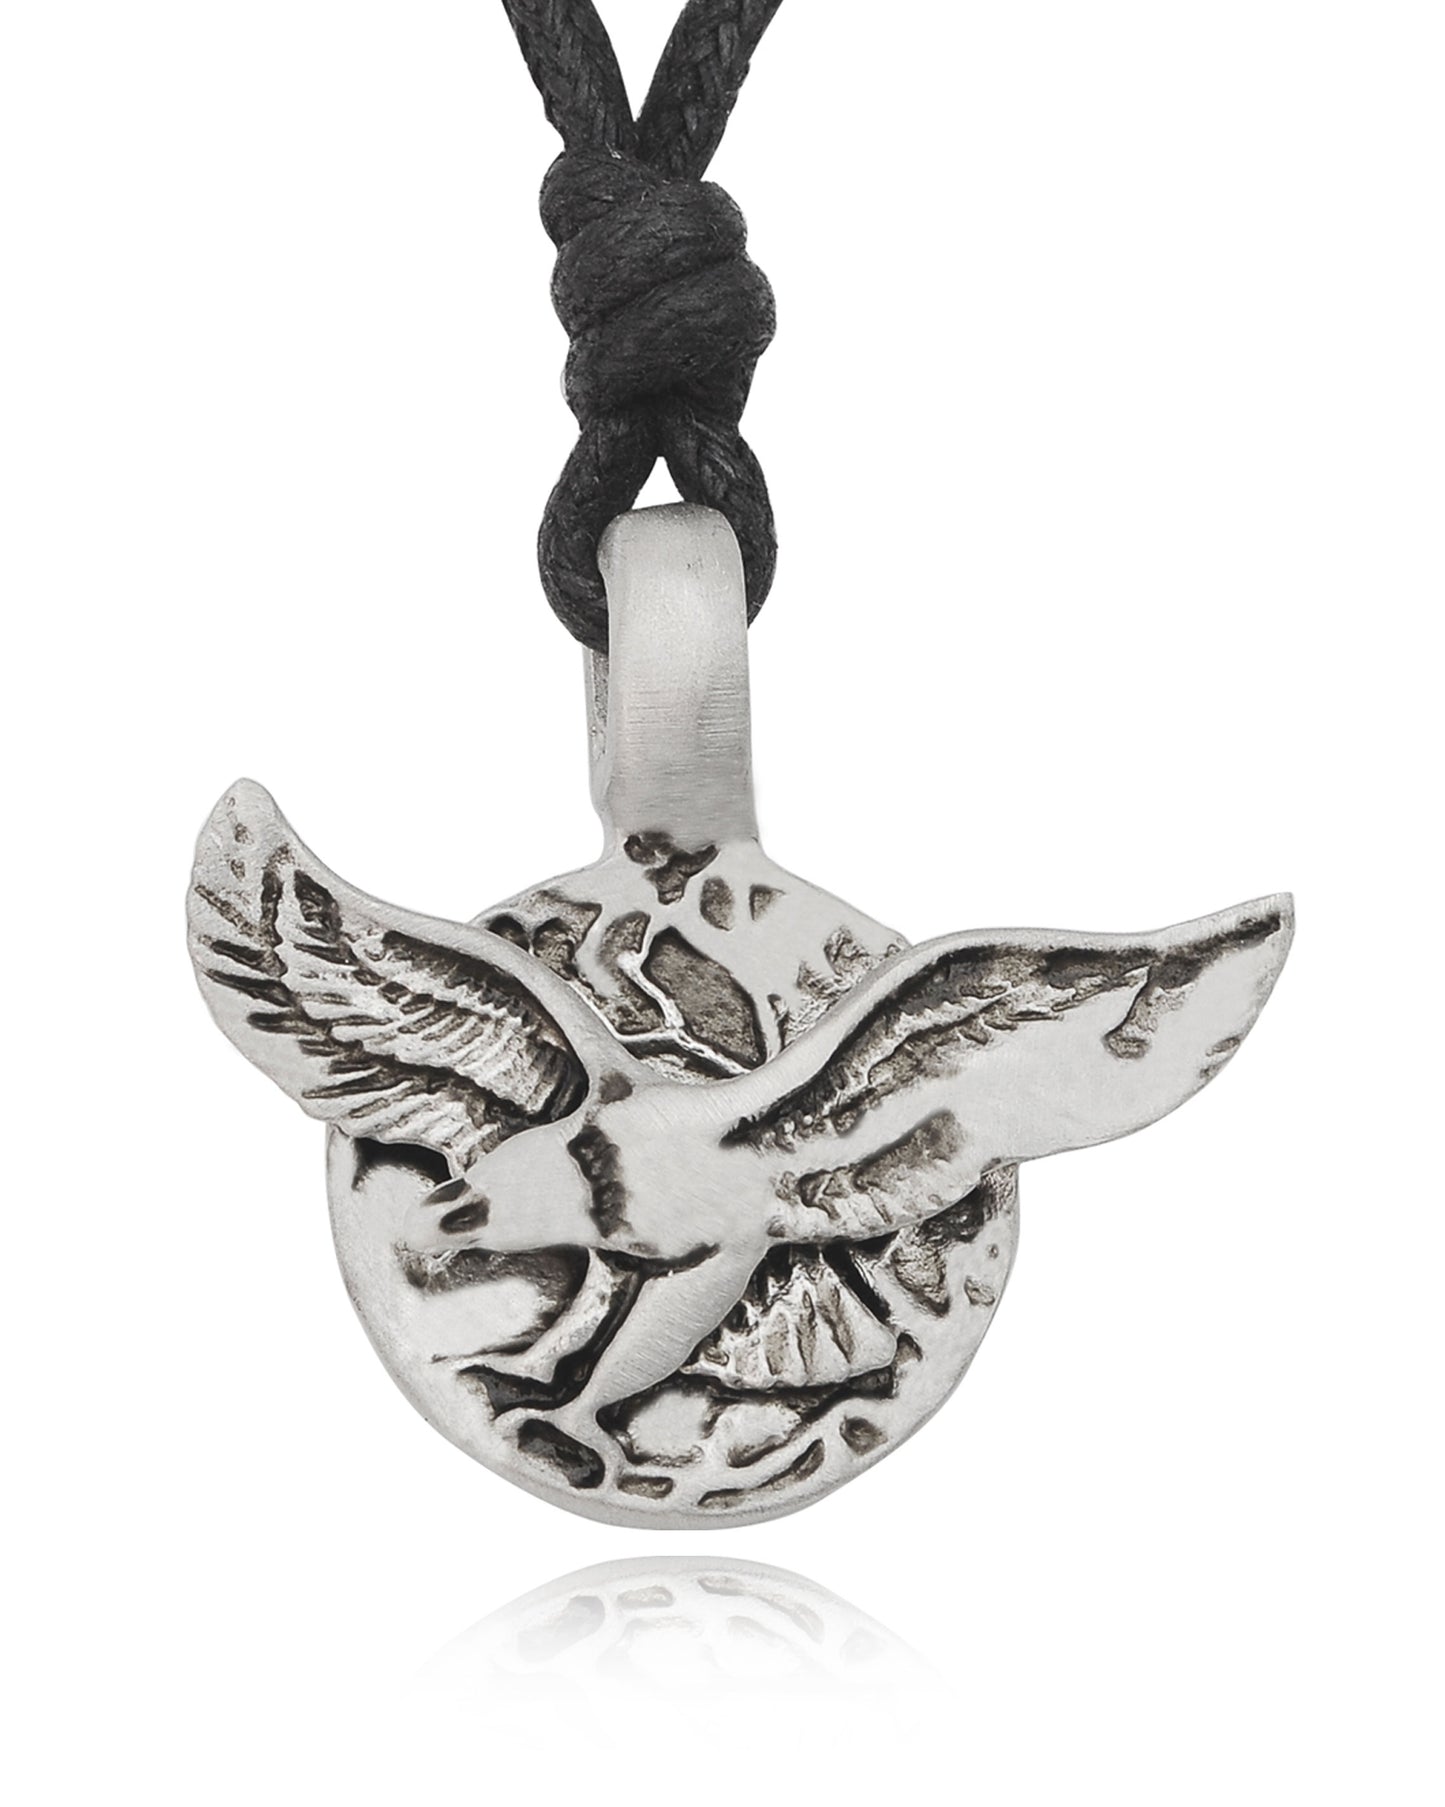 American Eagle Silver Pewter Charm Necklace Pendant Jewelry